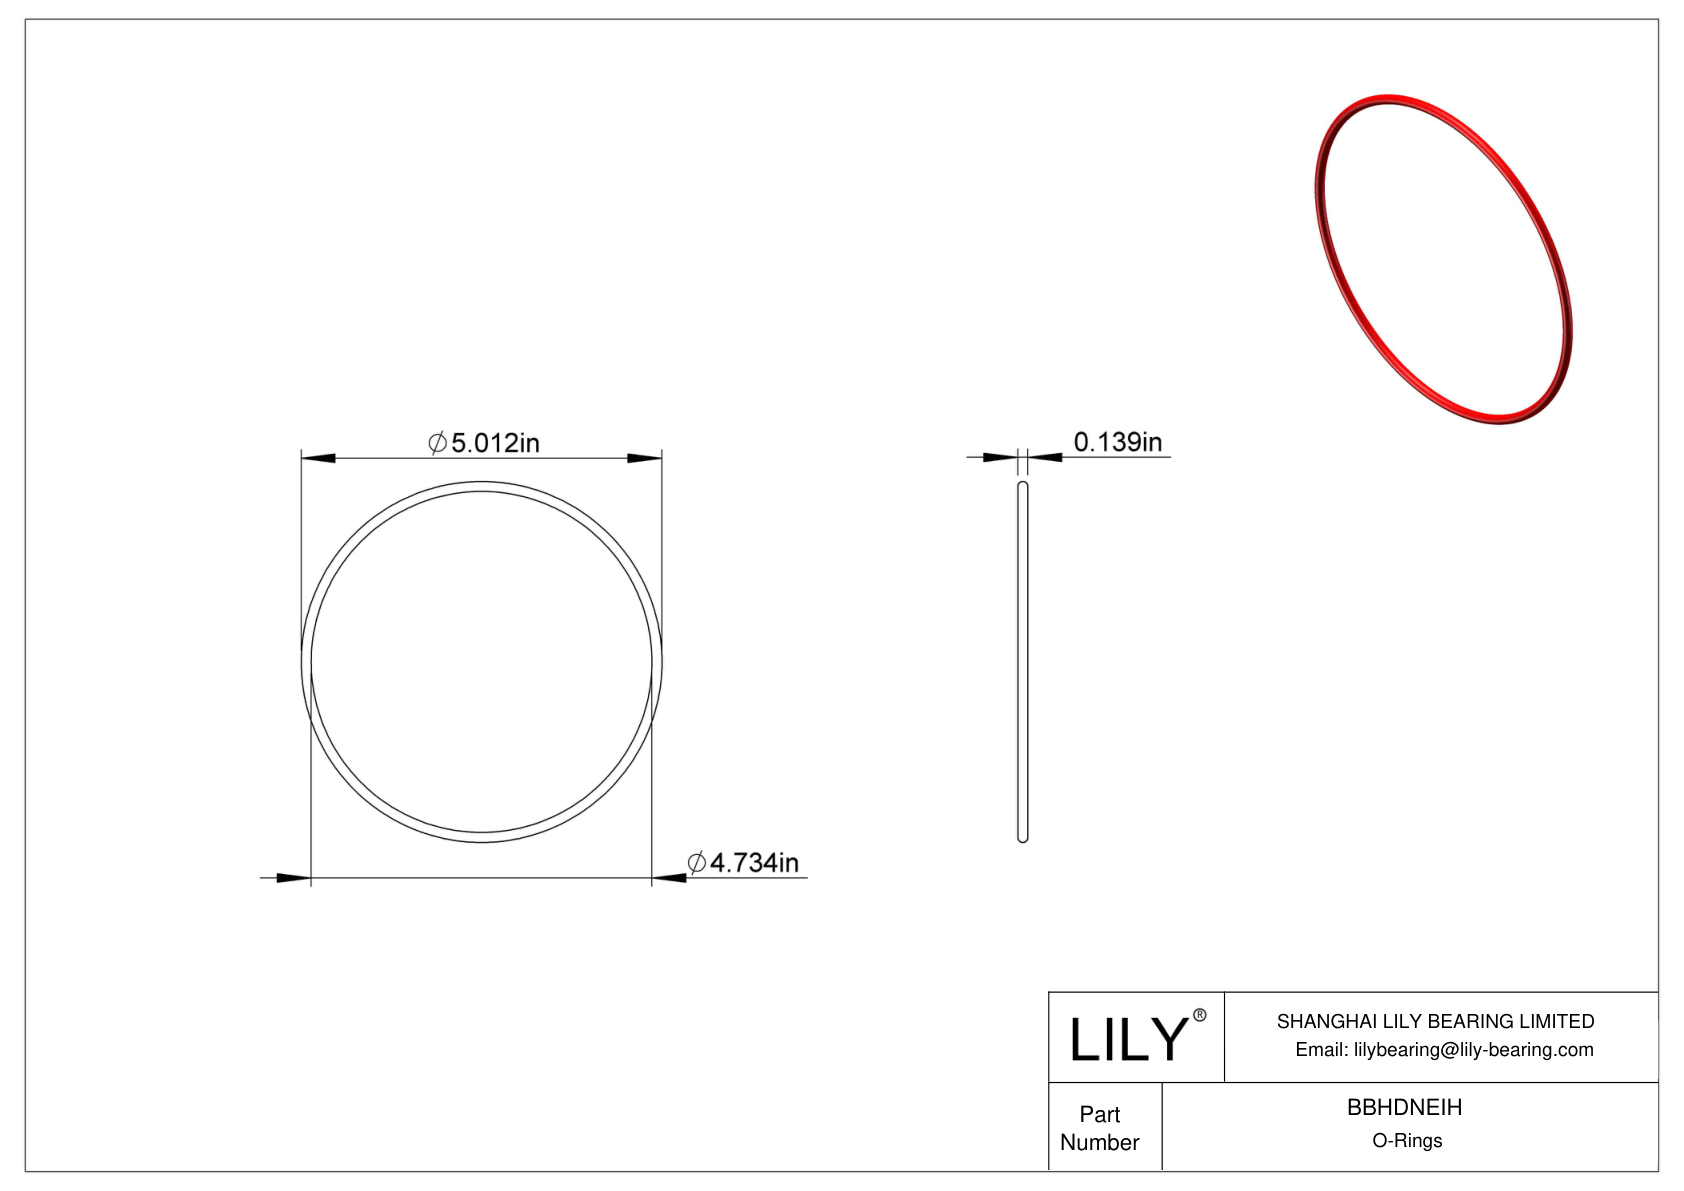 BBHDNEIH High Temperature O-Rings Round cad drawing